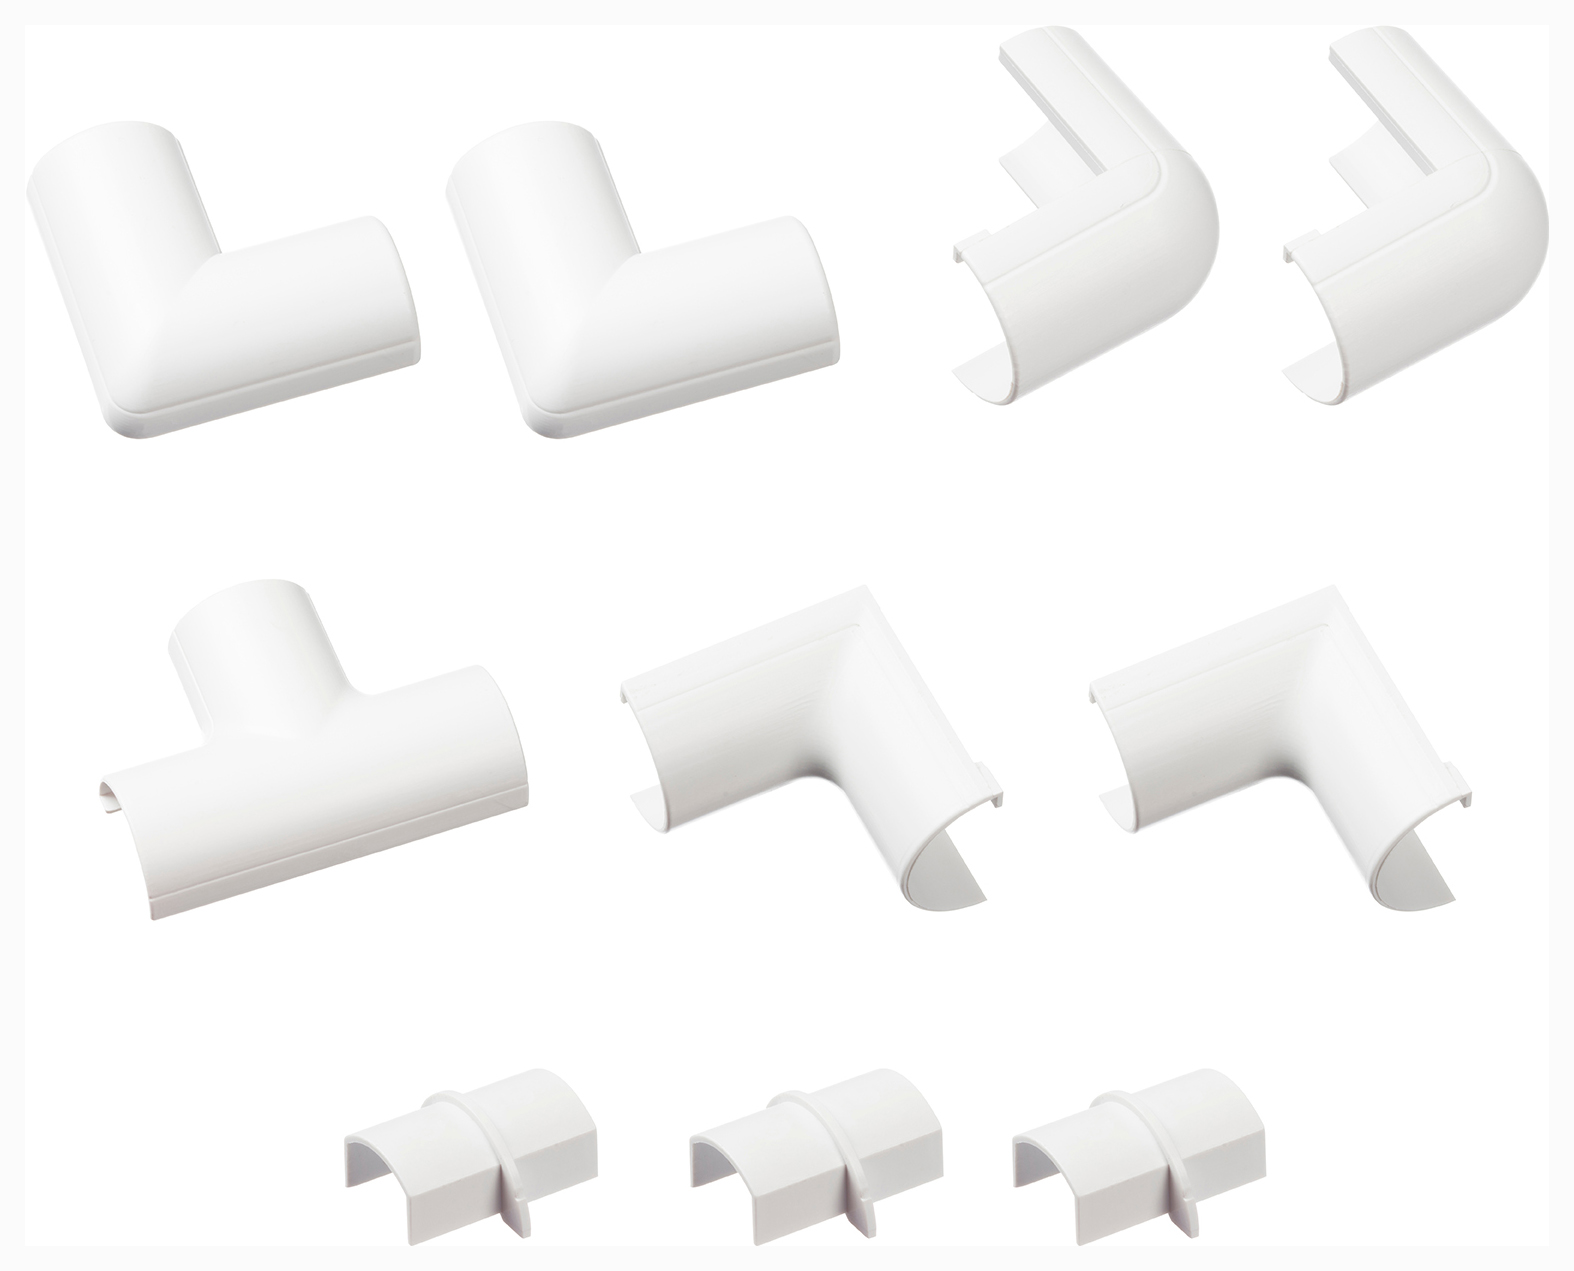 Image of D-Line 20 x 10mm Trunking Accessory Multi-Pack - Pack of 10